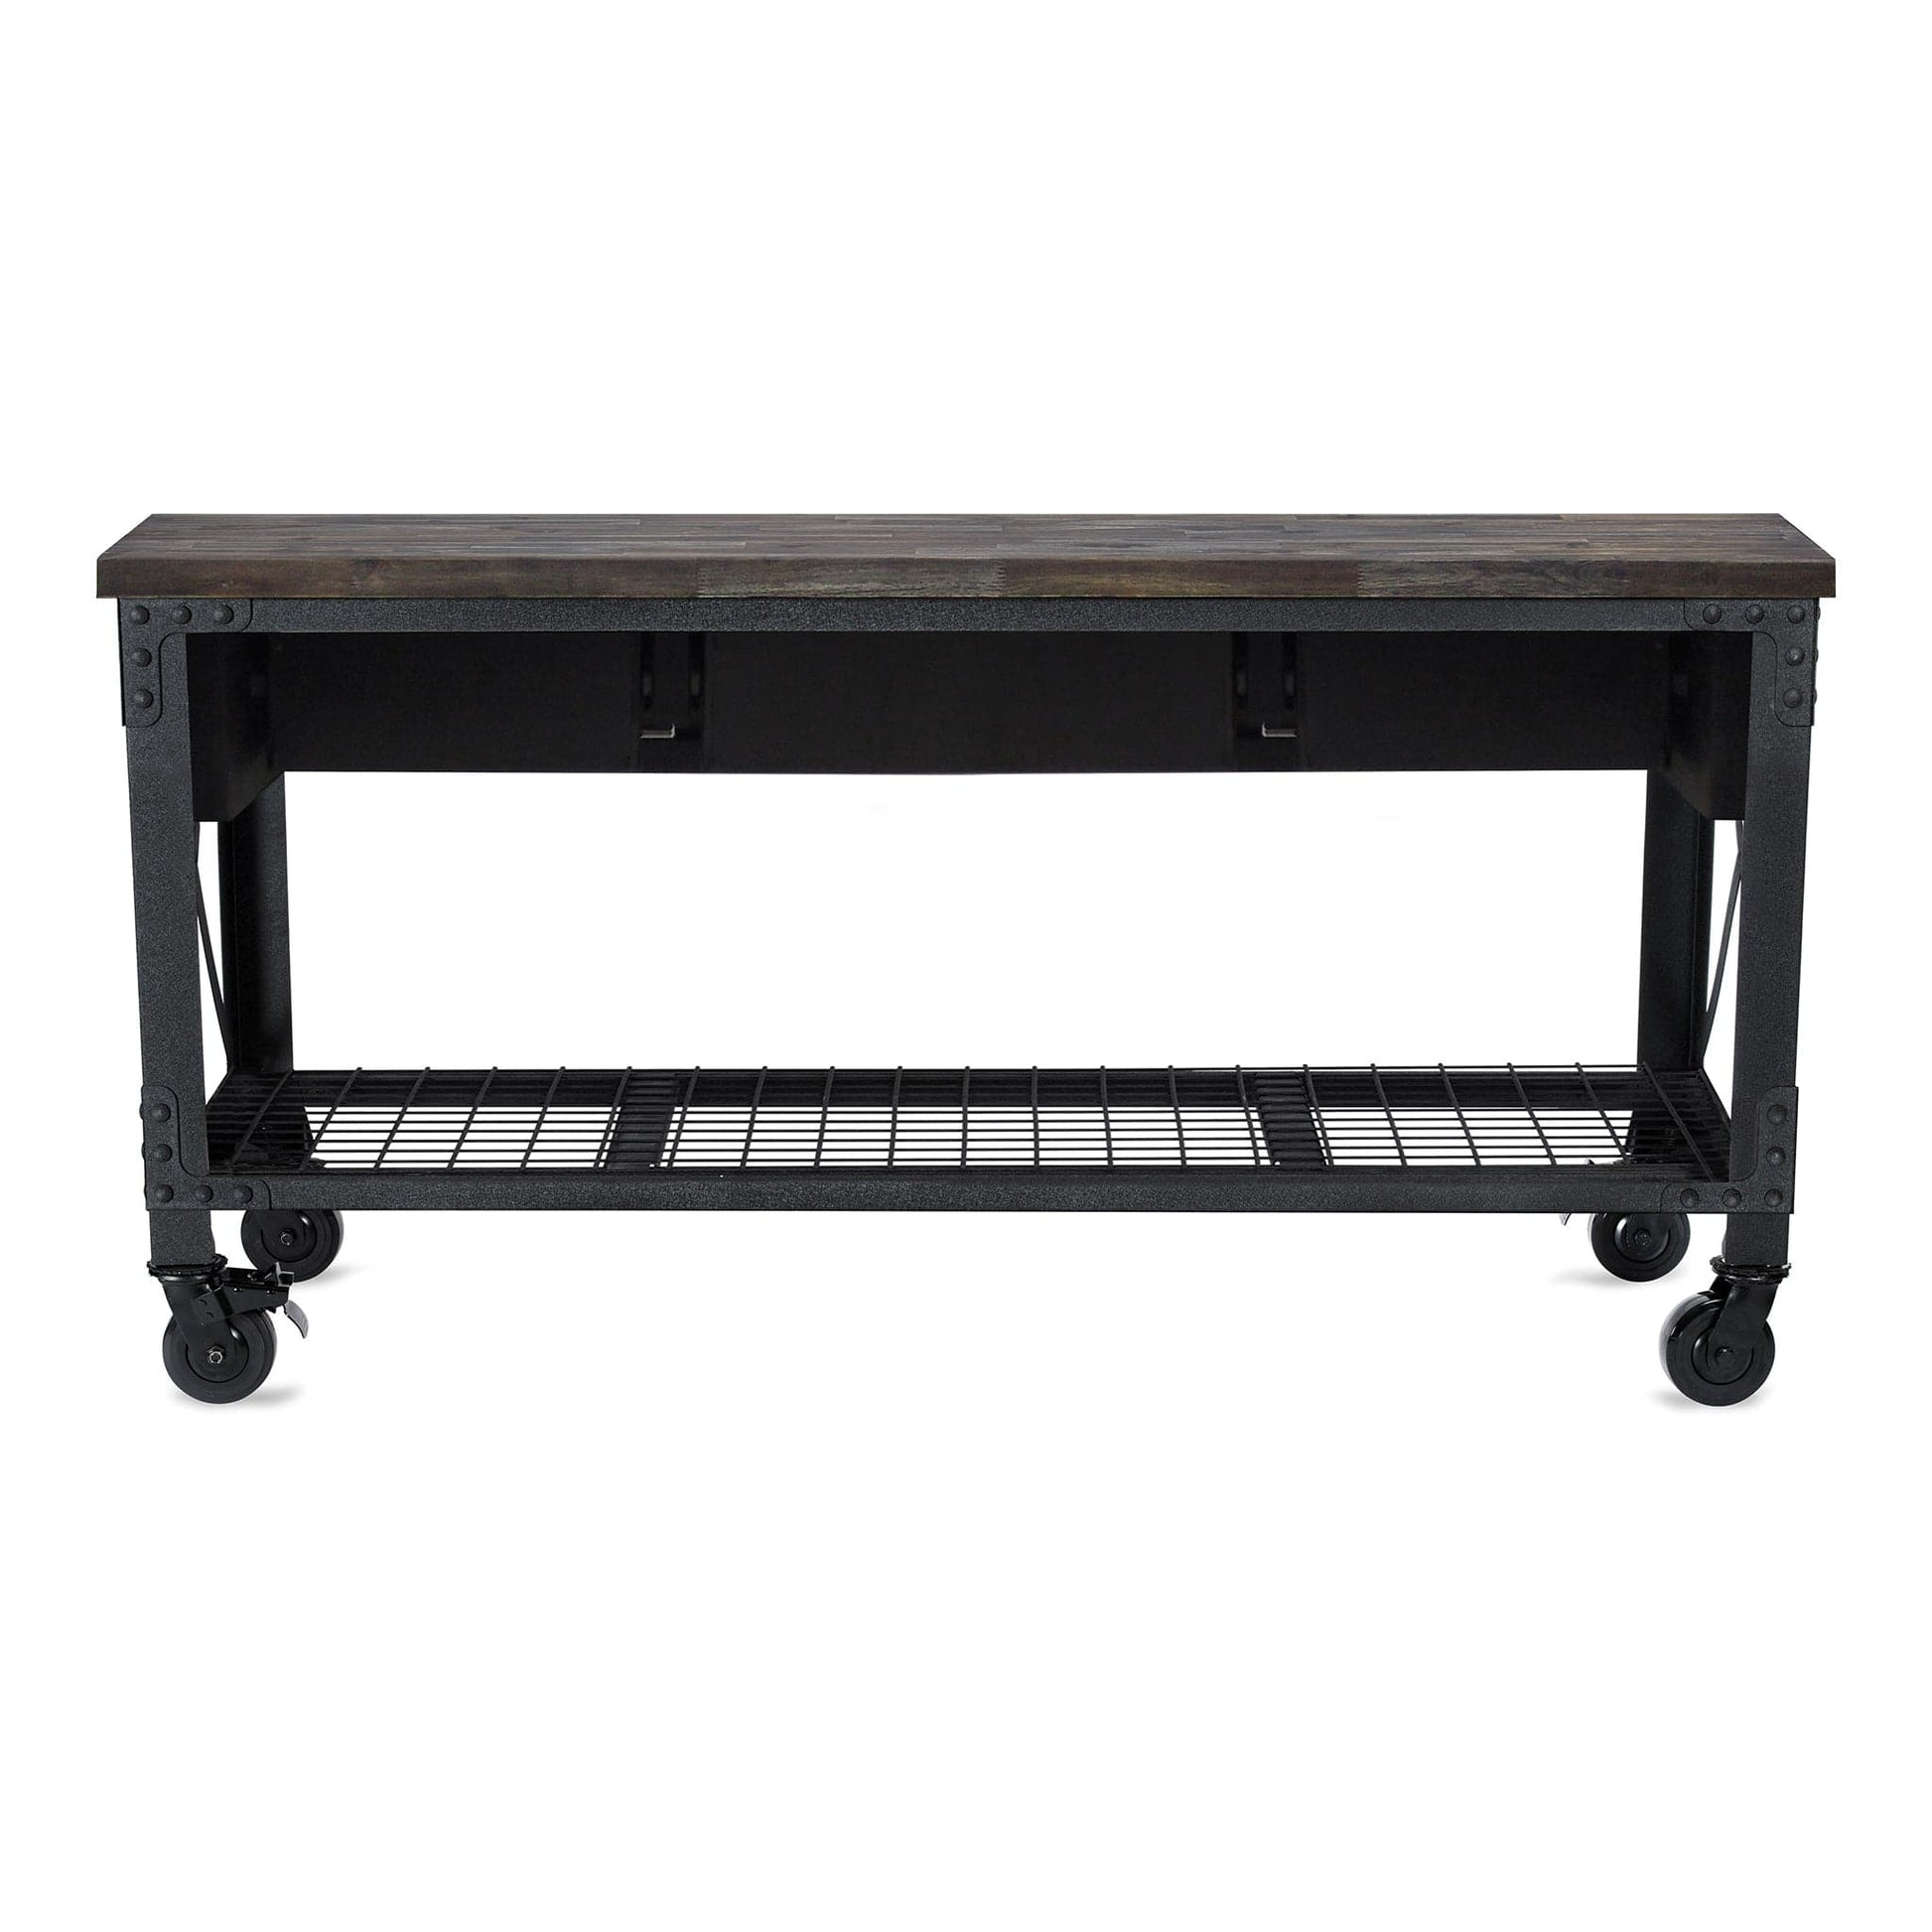 DuraMax 72 In x 24 In 3-Drawer Rolling Industrial Workbench with Wood Top - Aged Espresso